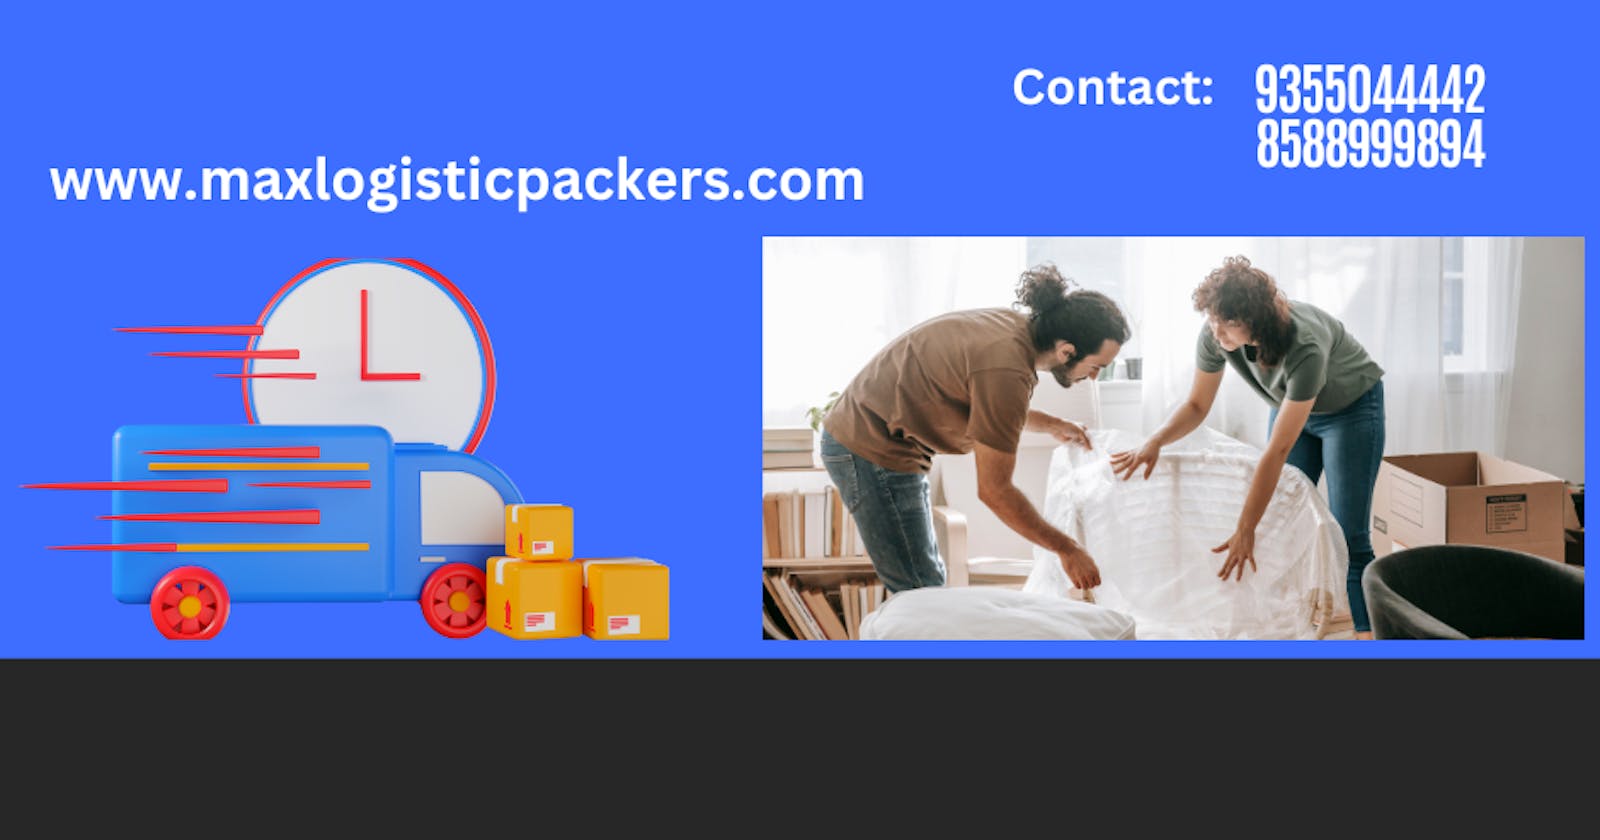 Most well-known packers and movers in Rohini: -